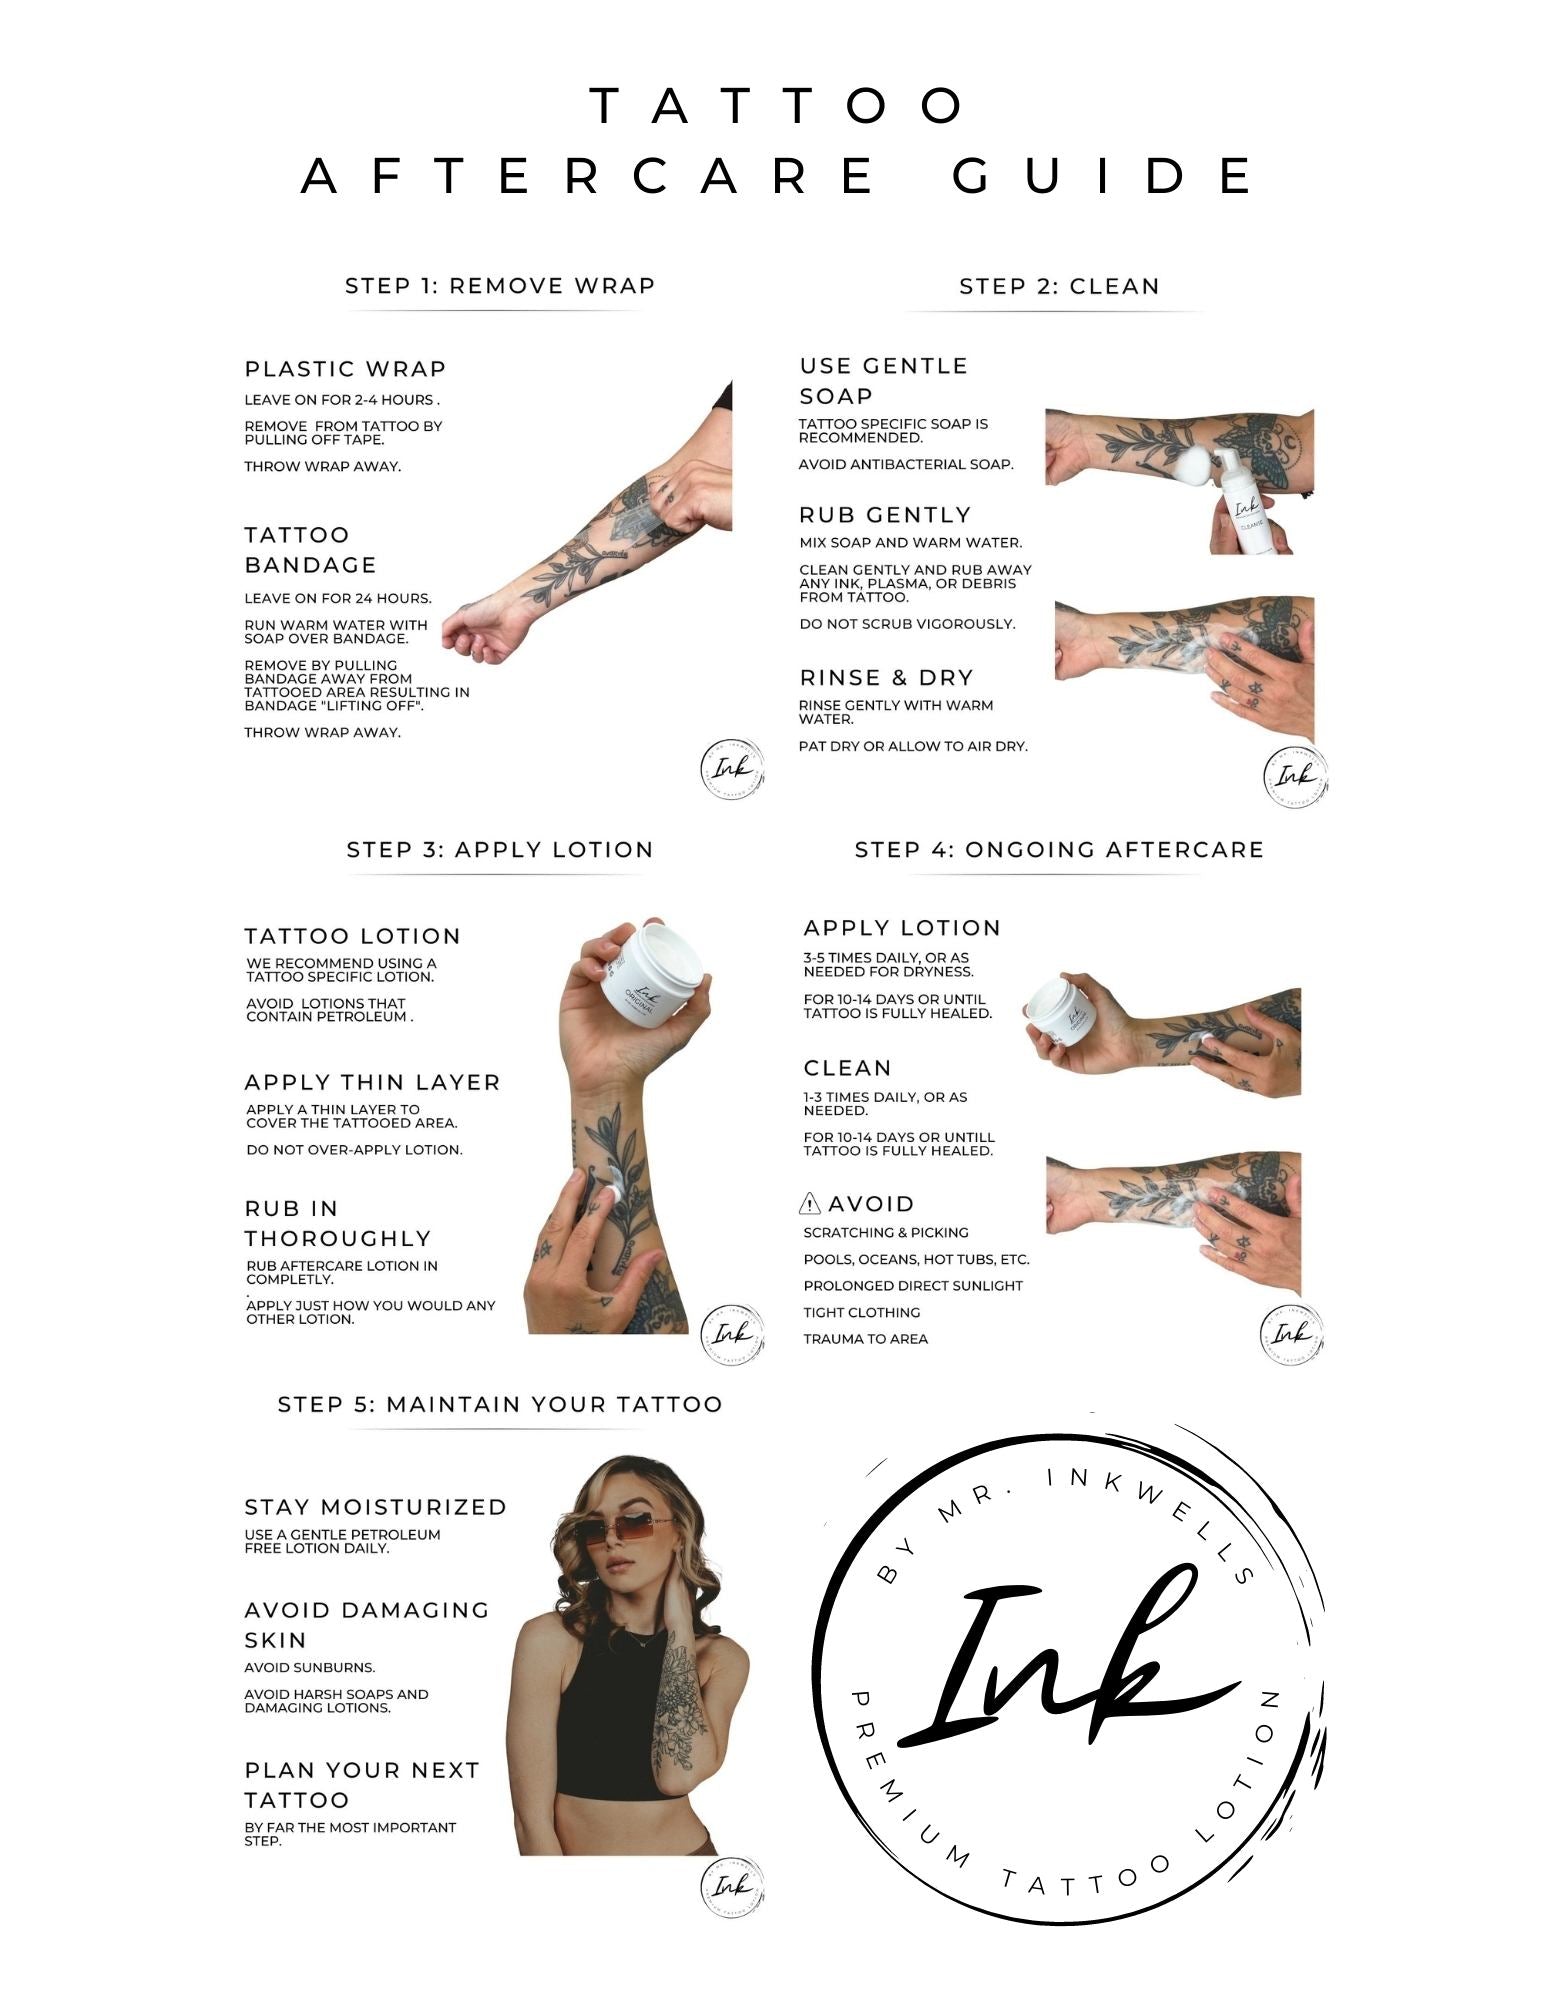 Discover more than 182 basic tattoo aftercare best